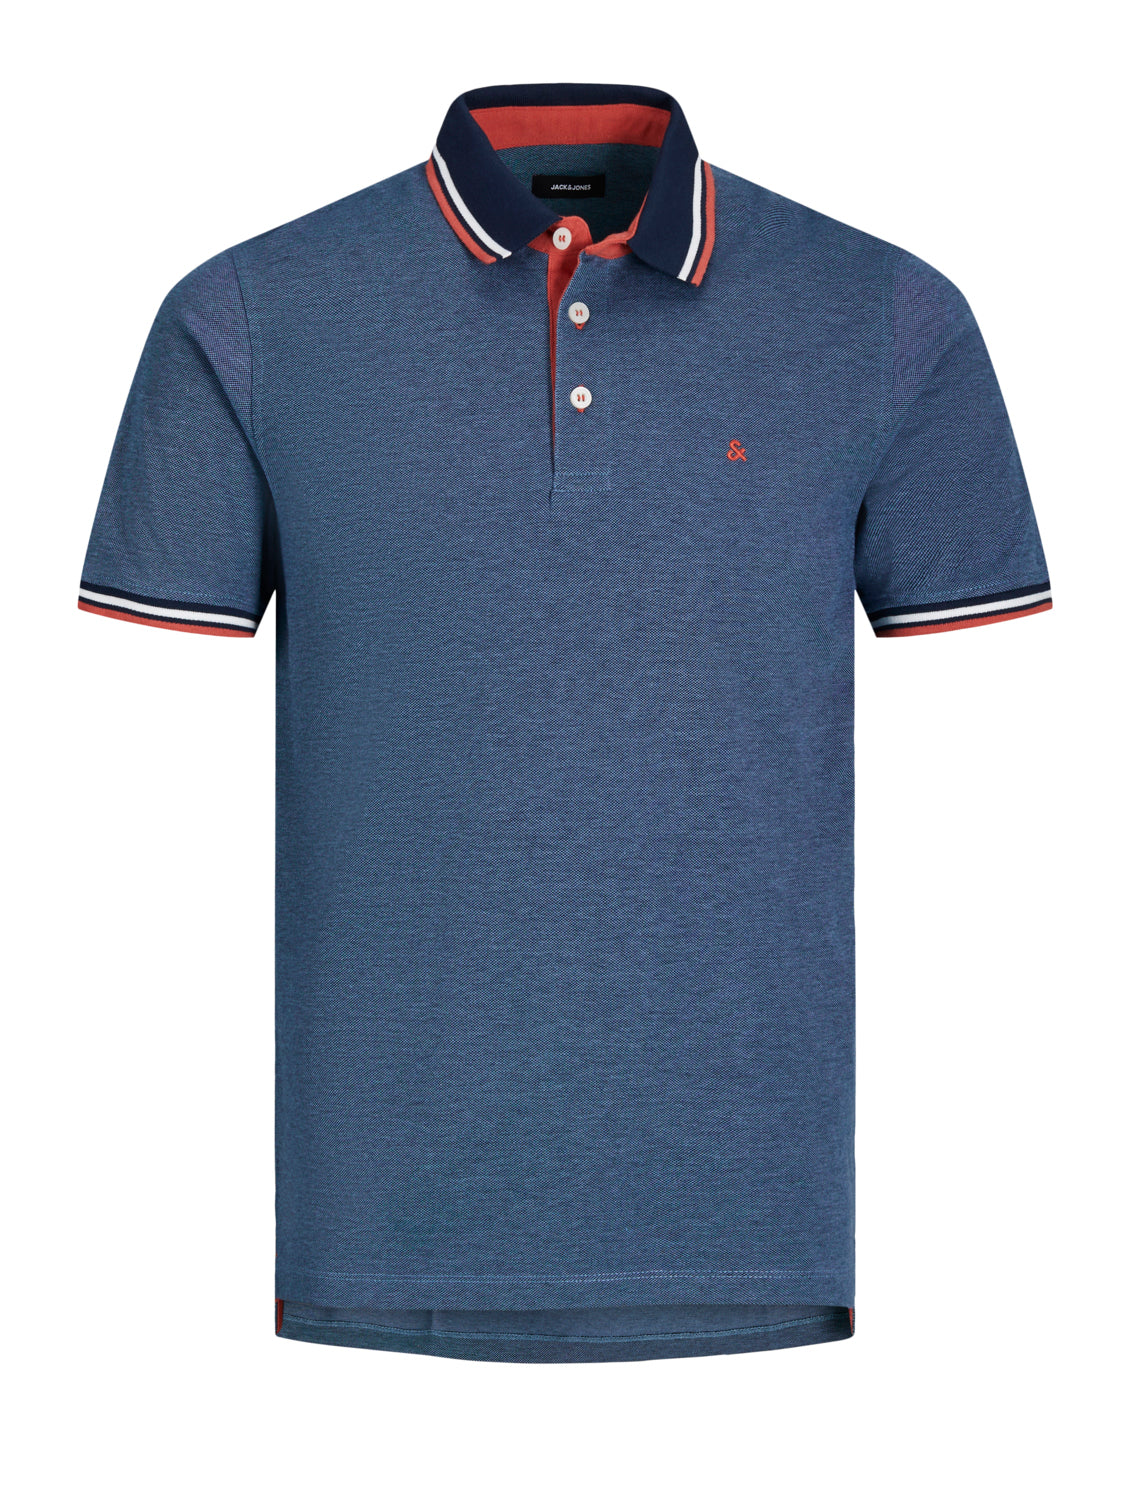 Classic Tipped Polo Shirt